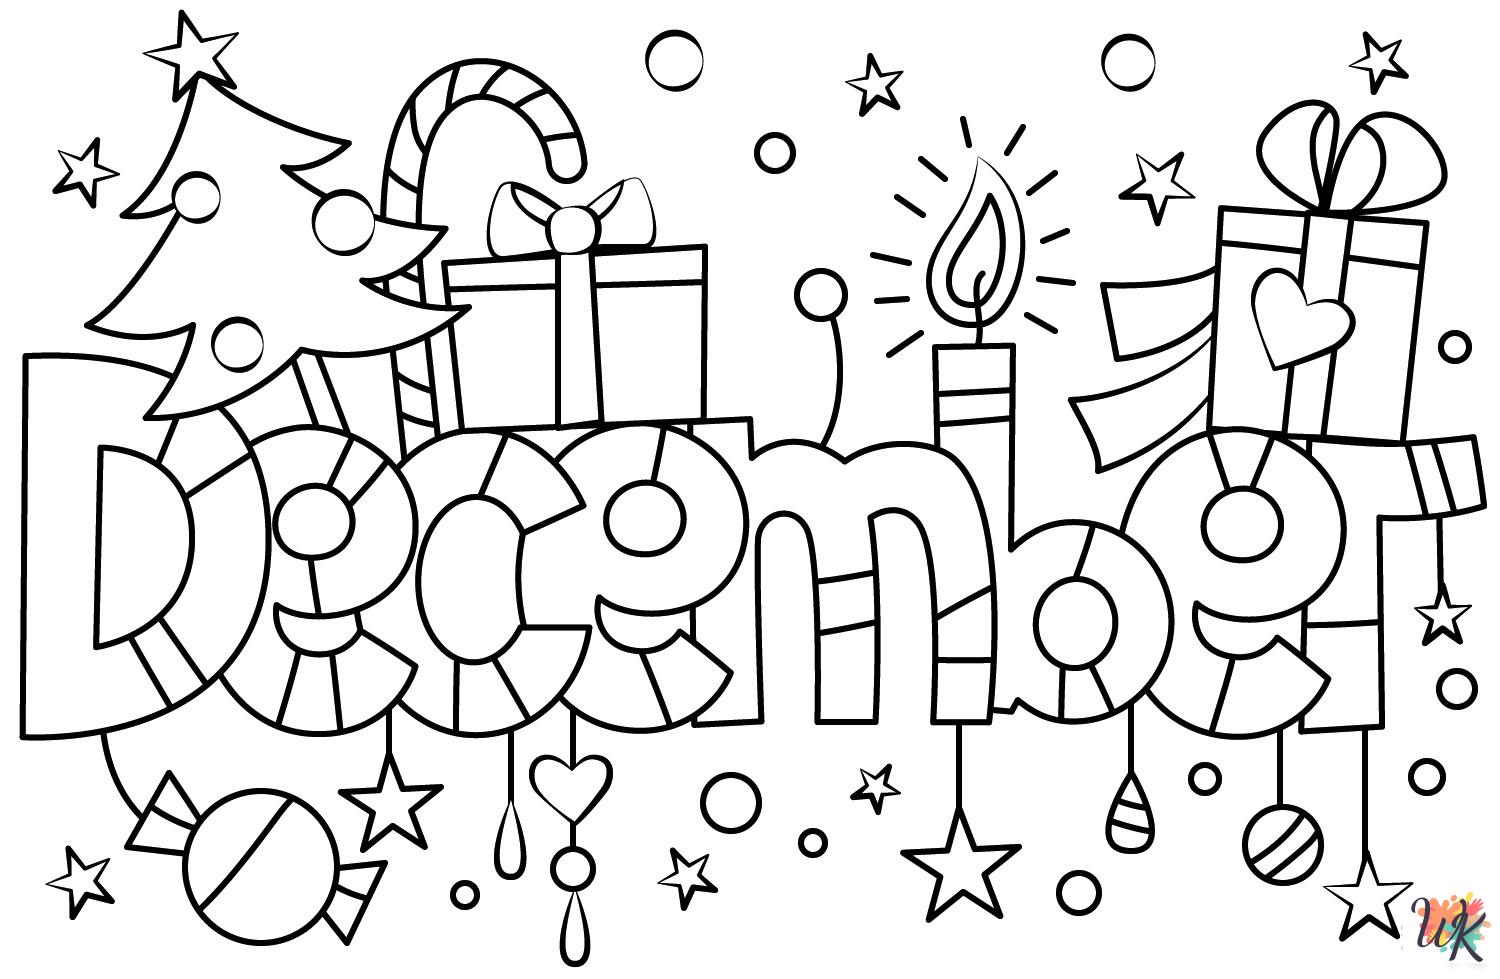 December coloring pages free printable